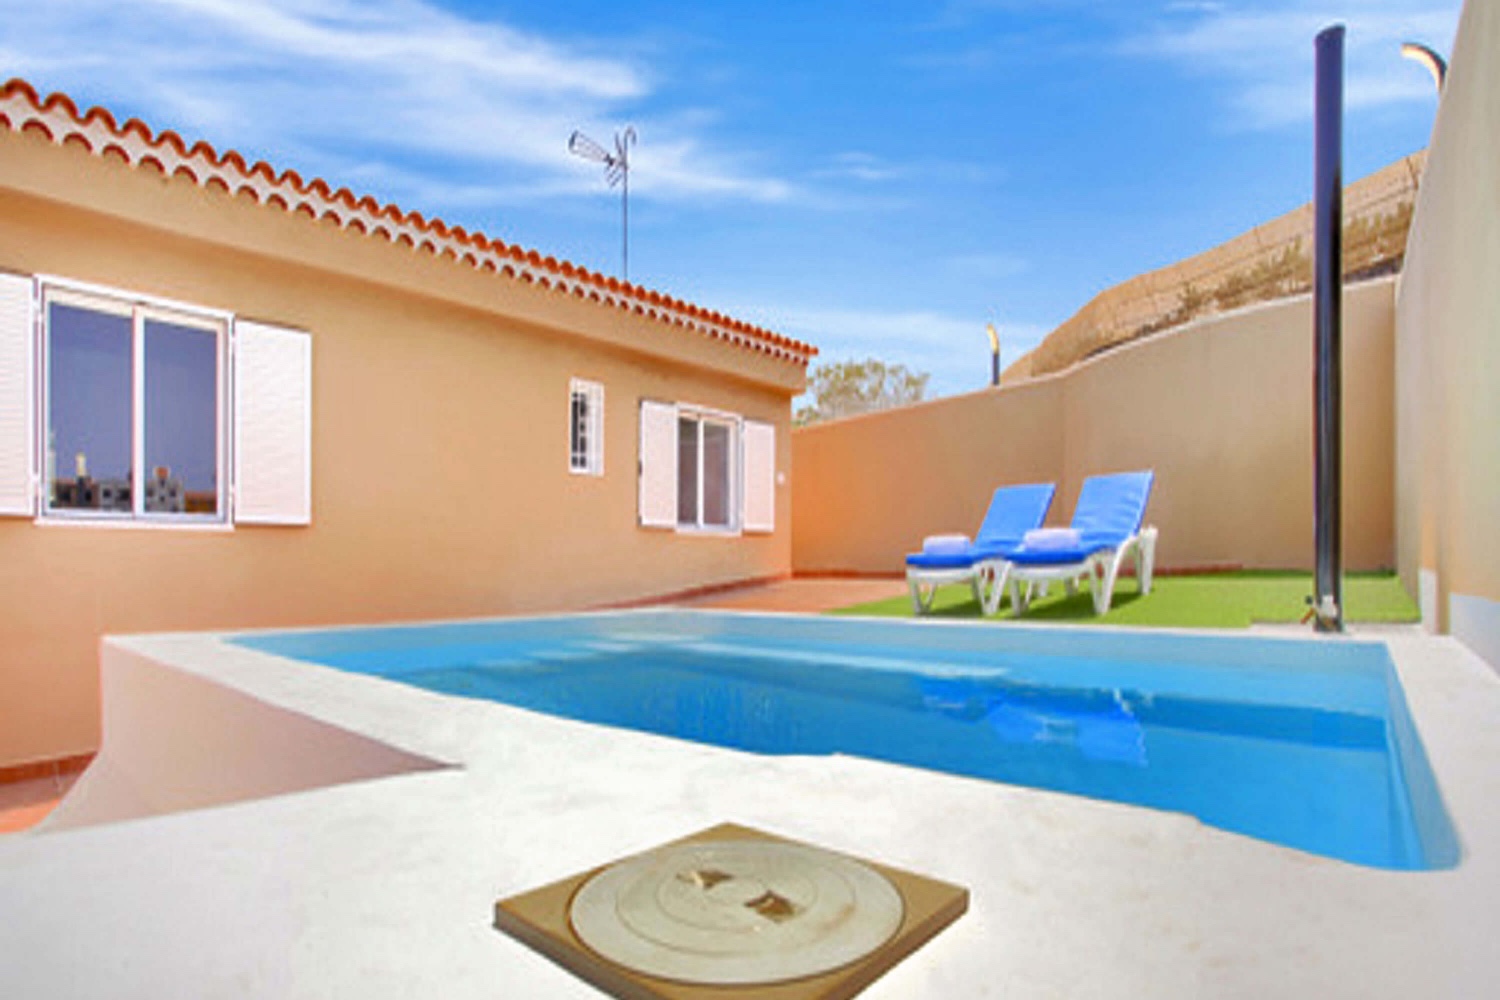 Beautiful independent house with private pool located in Guía de Isora just 1.5 km from San Juán beach